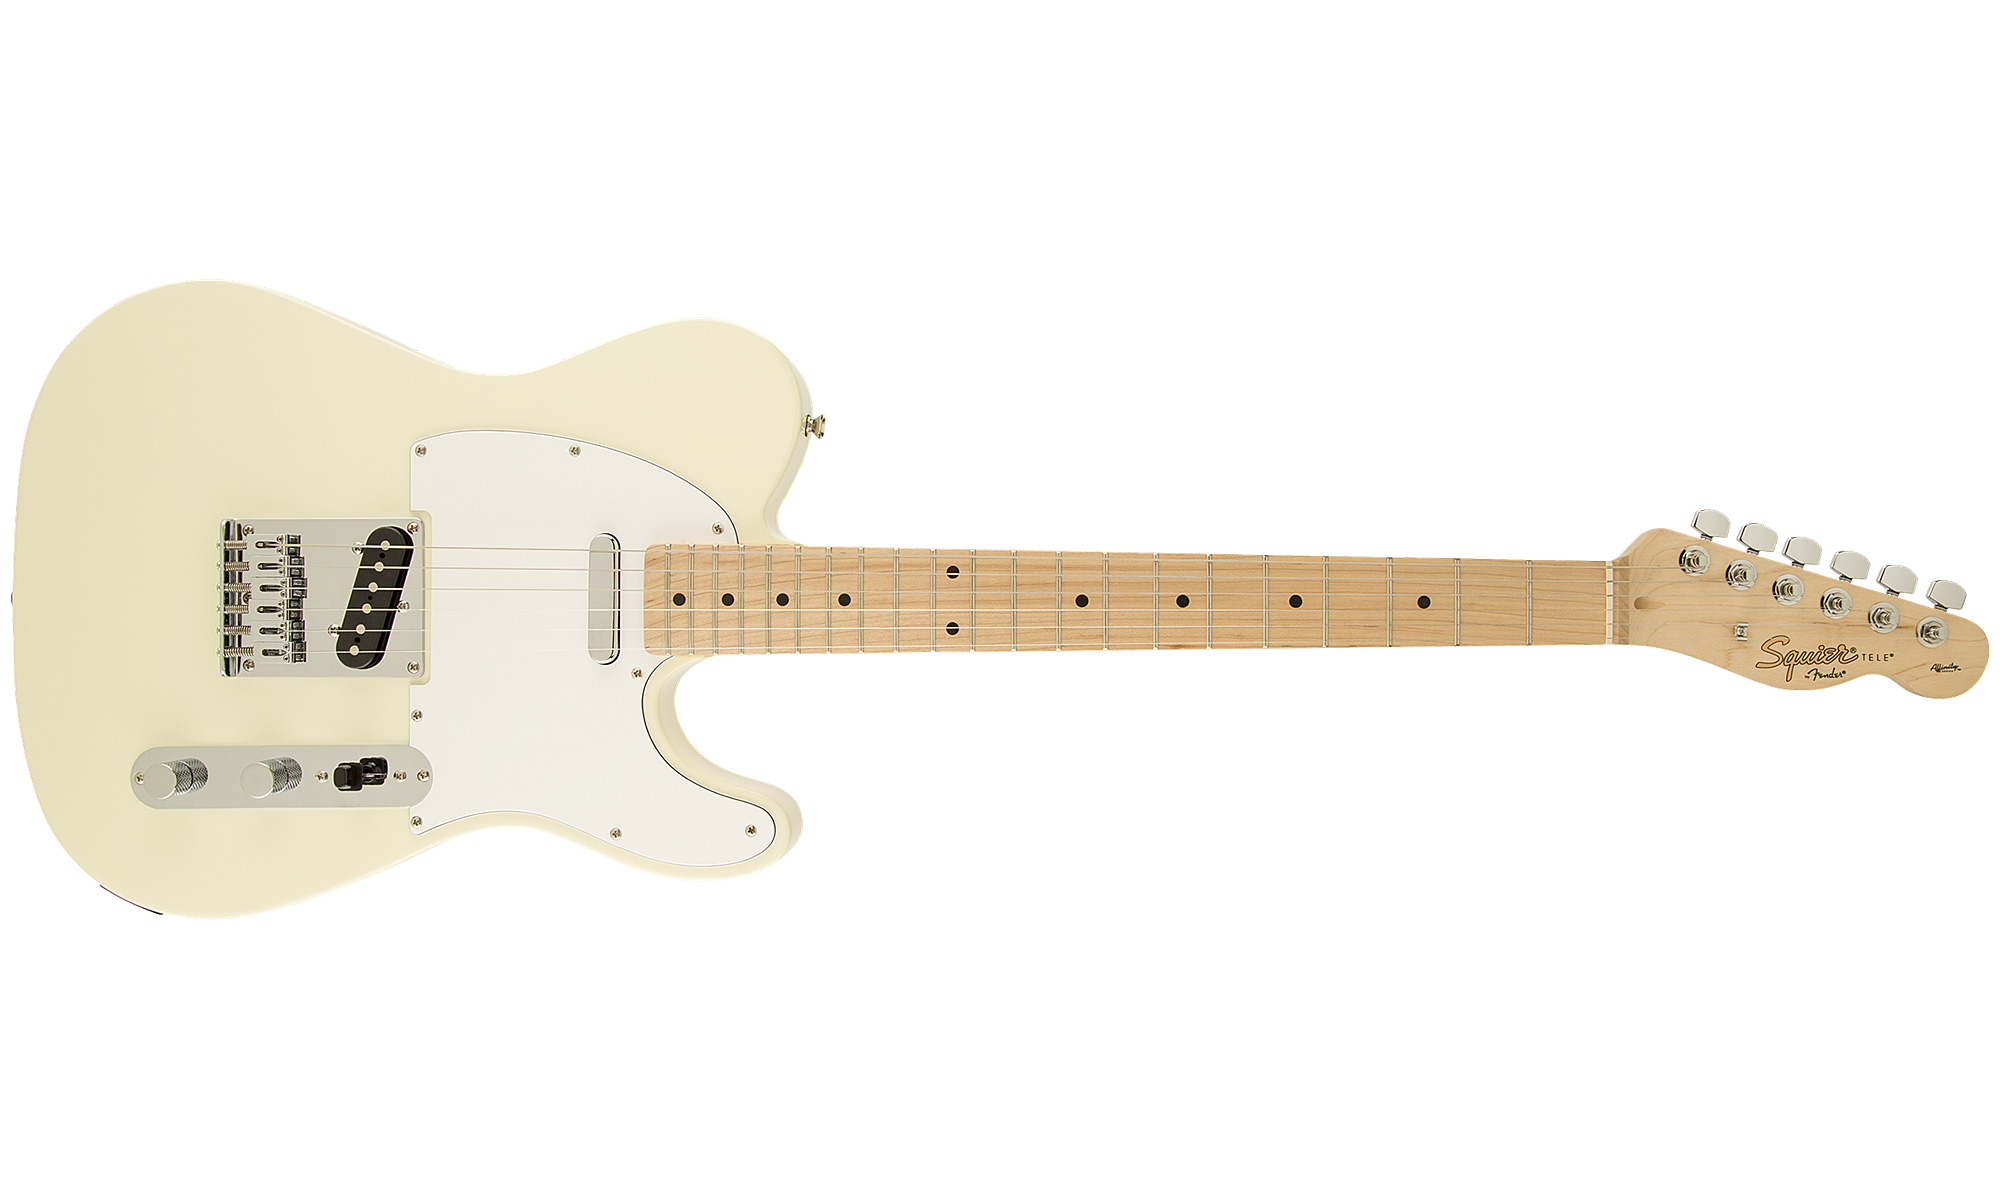 Squier Tele Affinity Series 2013 Mn - Arctic White - Tel shape electric guitar - Variation 1